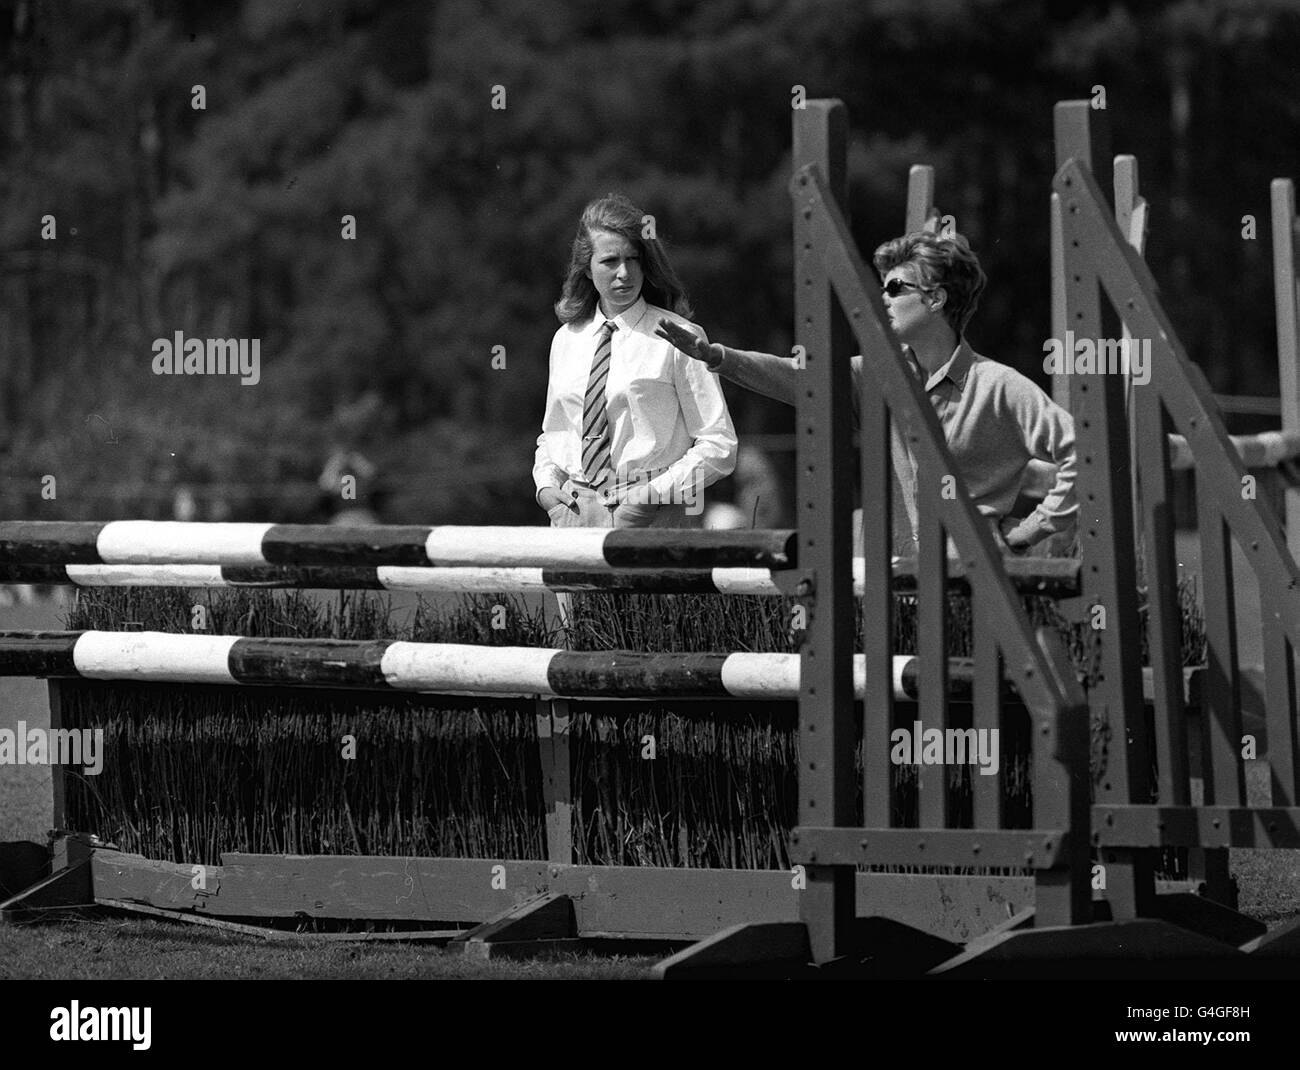 PA NEWS PHOTO 26/4/68 THE DRESSAGE EVENT OF THE WINDSOR HORSE TRIALS AT SMITH'S LAWN, WINDSOR GREAT PARK, BERKSHIRE. PRINCESS ANNE CHECKS THE OBSTACLES WITH A COMPANION PRIOR TO HER TAKING PART ON HER PONY 'PURPLE STAR' Stock Photo